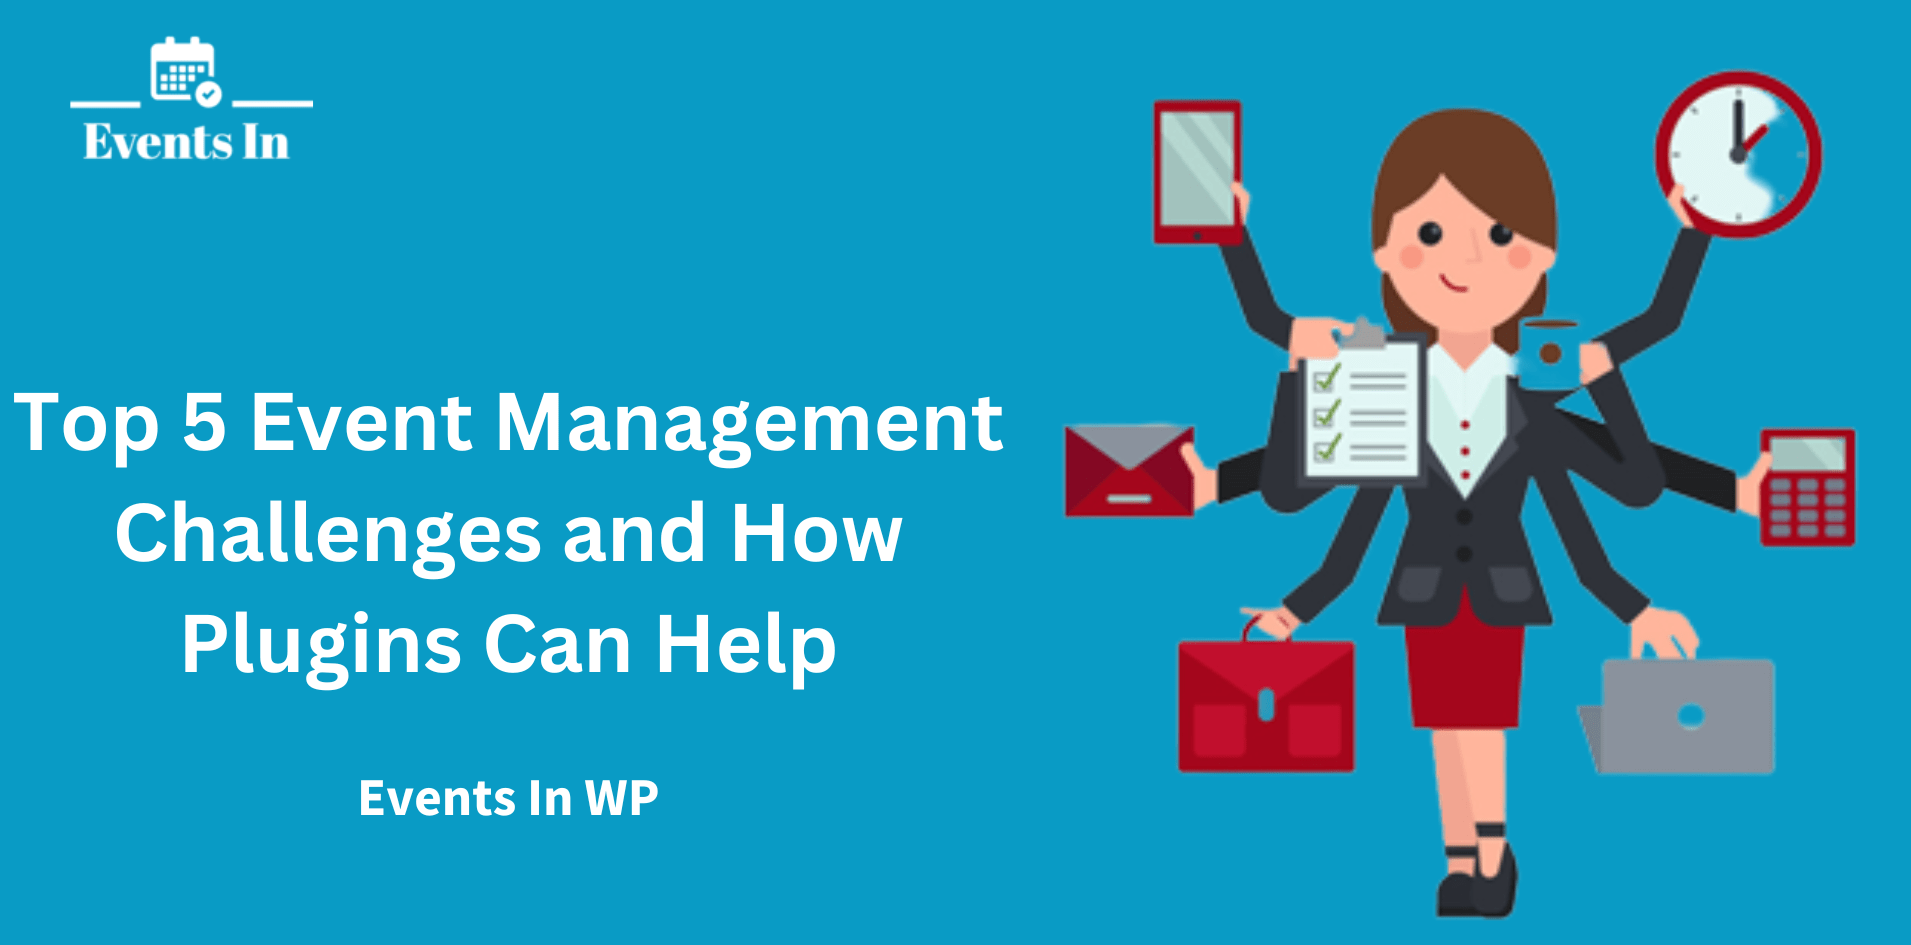 Top 5 Event Management Challenges and How Plugins Can Help